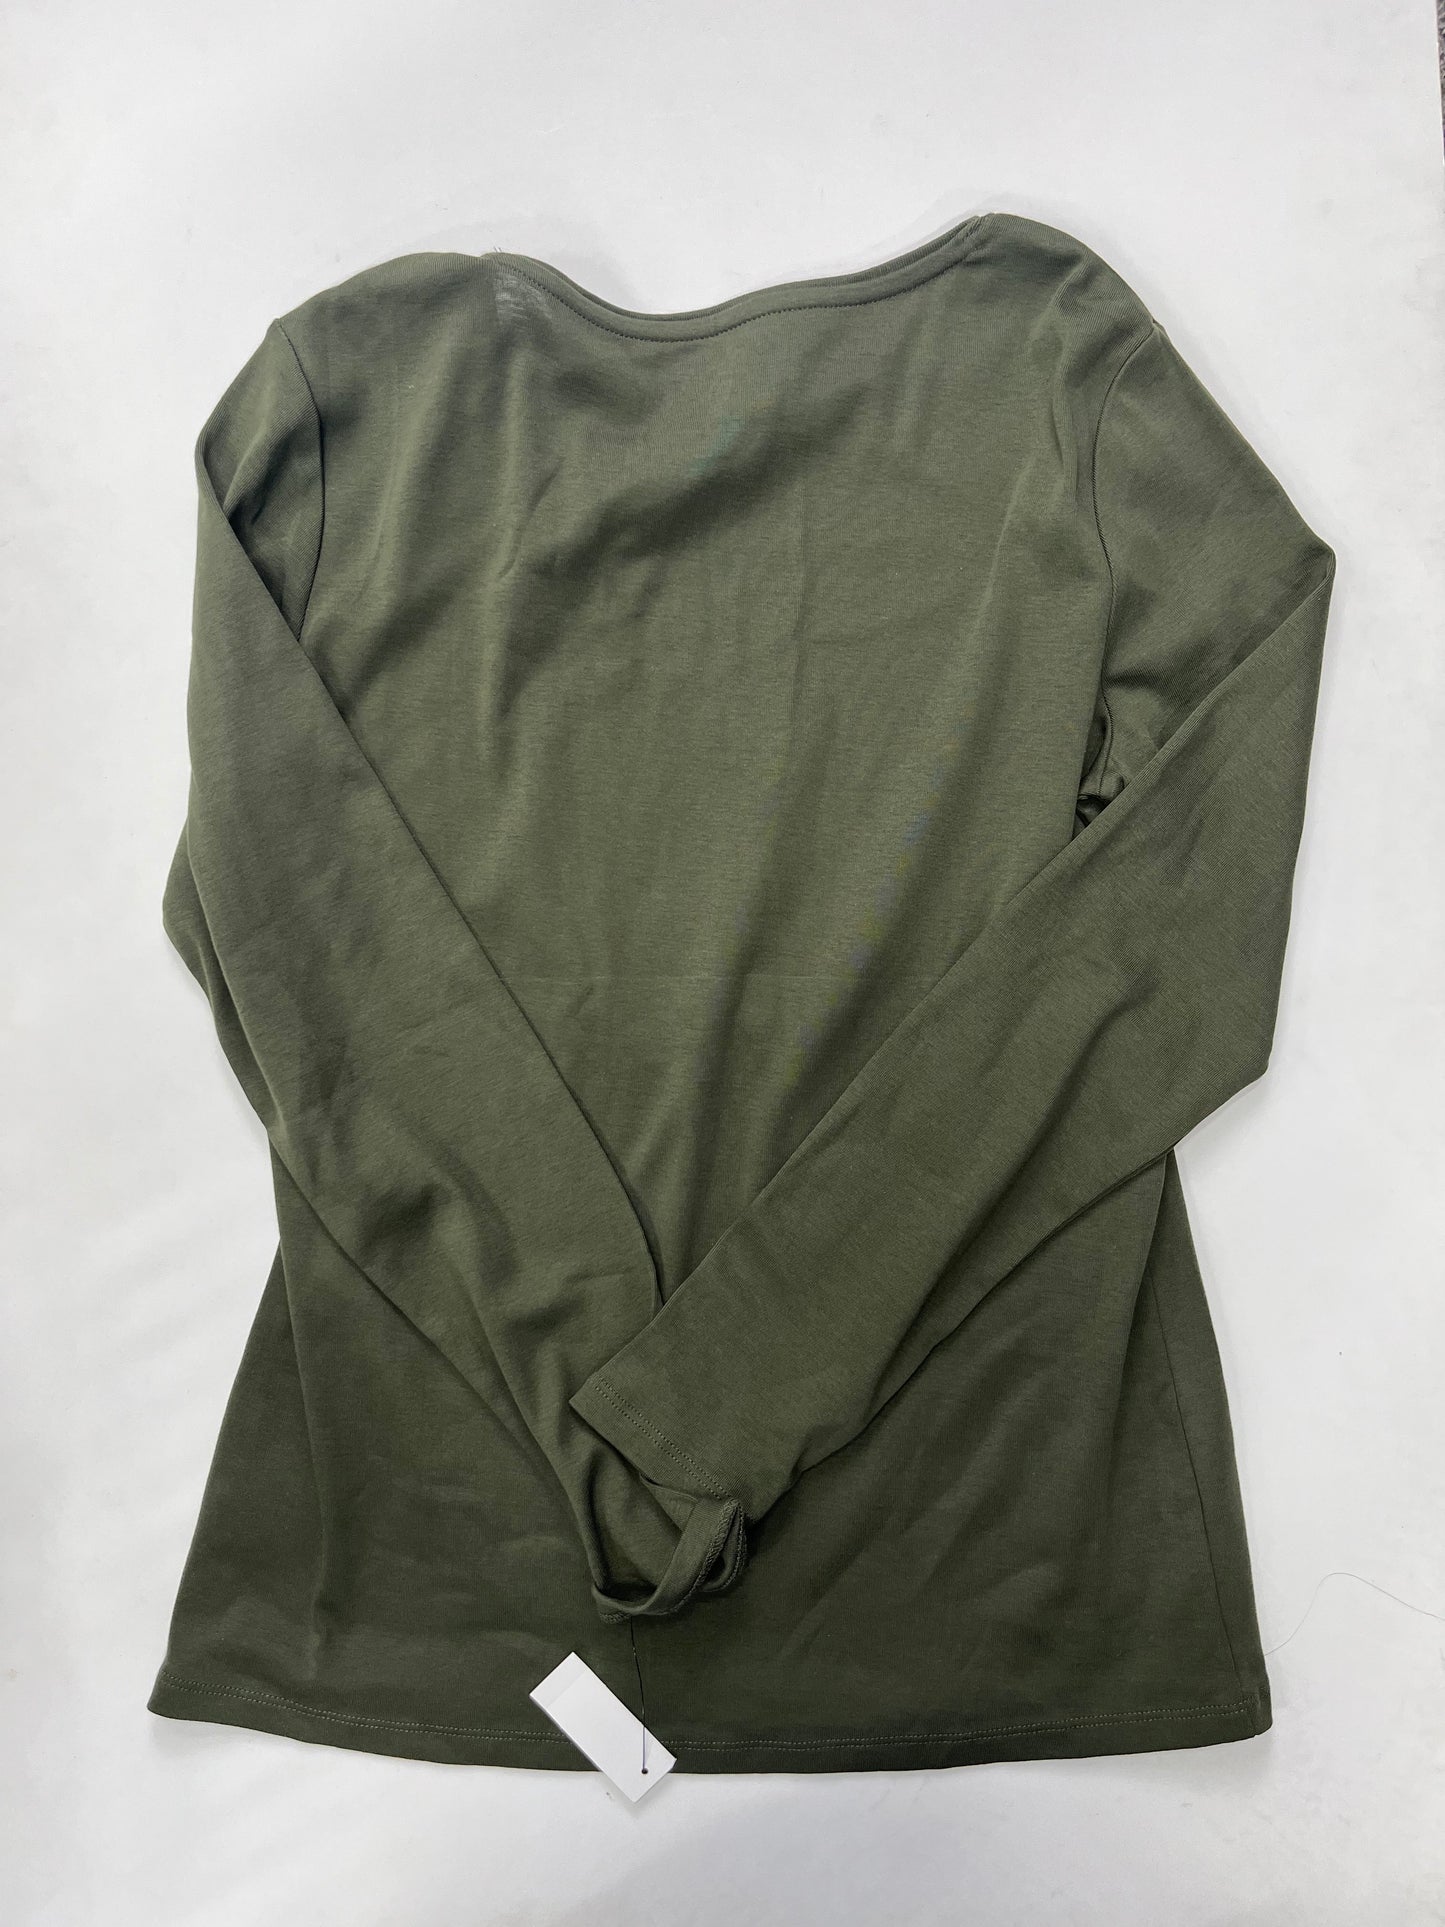 Green Top Long Sleeve Talbots NWT, Size M